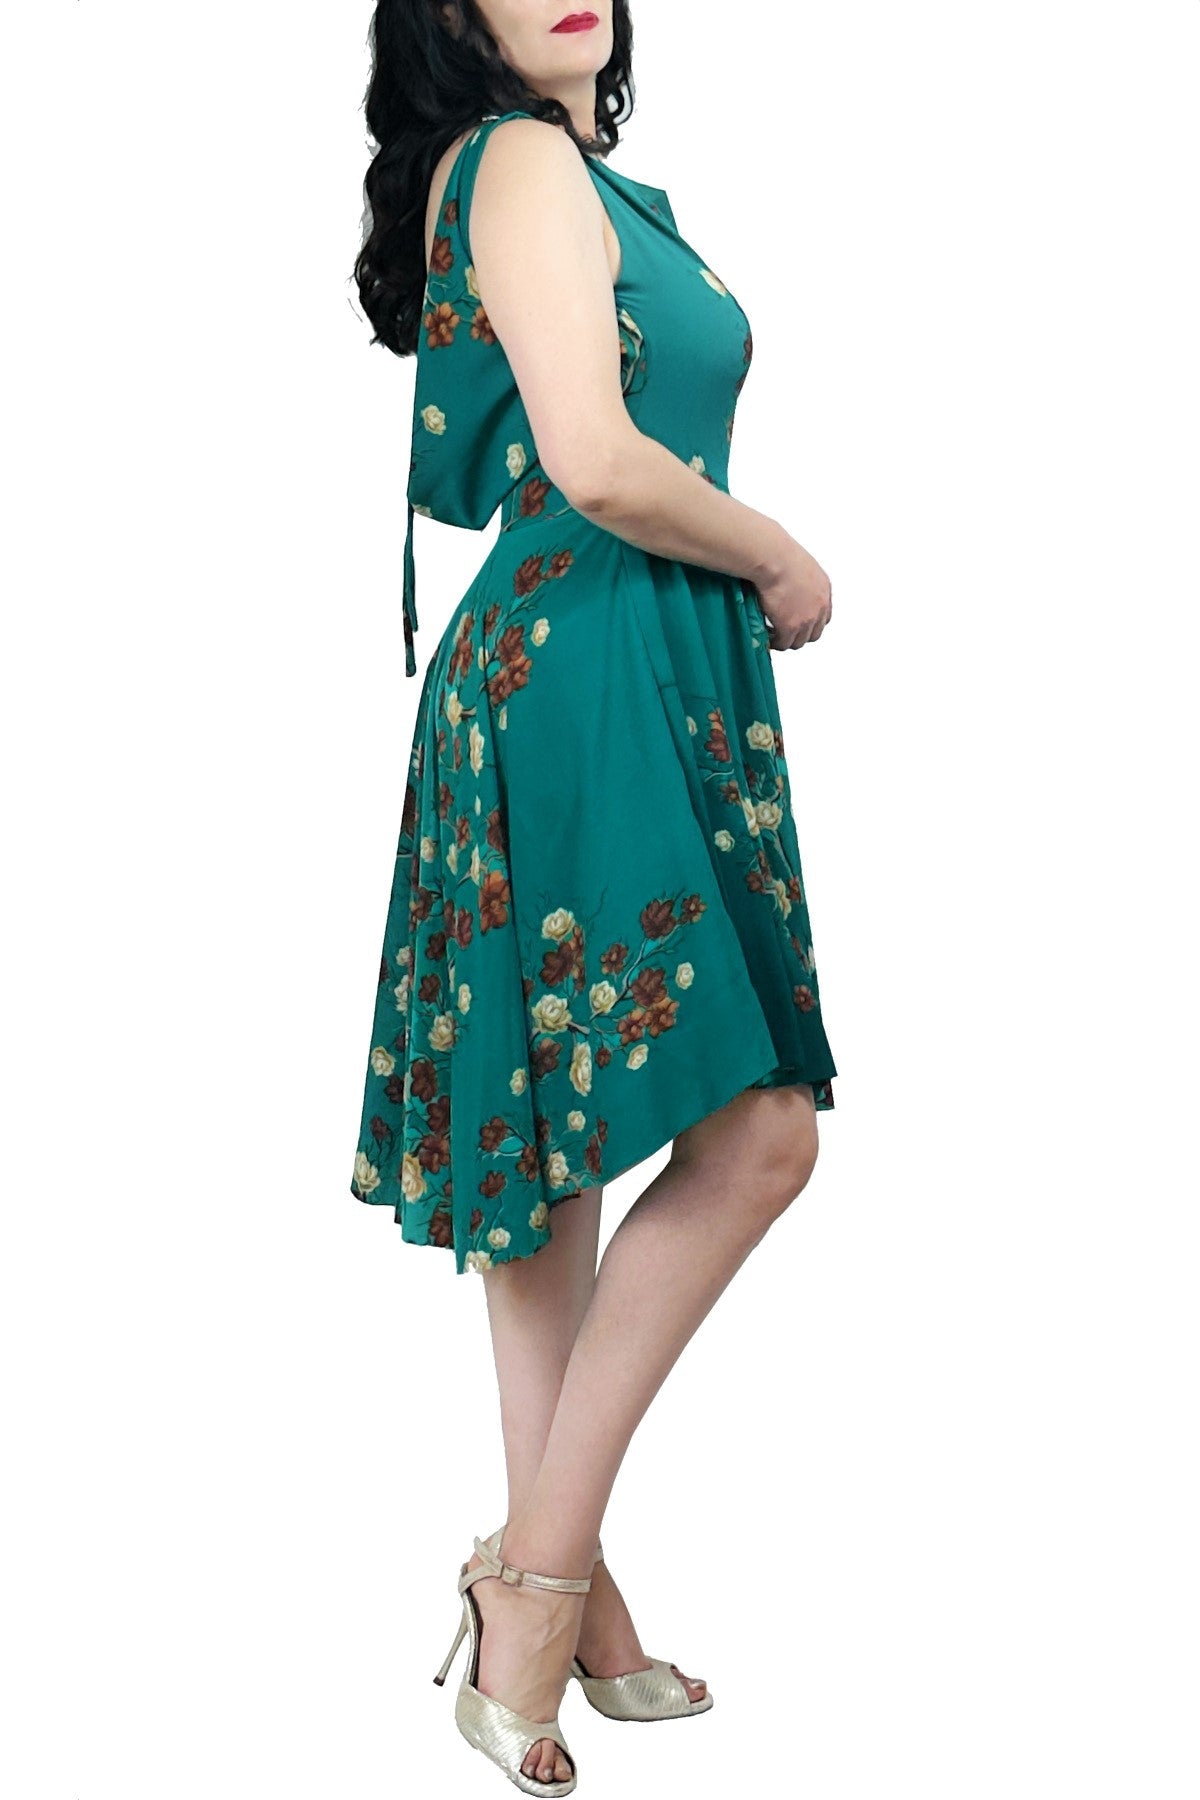 teal & floral ISABELLE tango dress with full skirt - Atelier Vertex